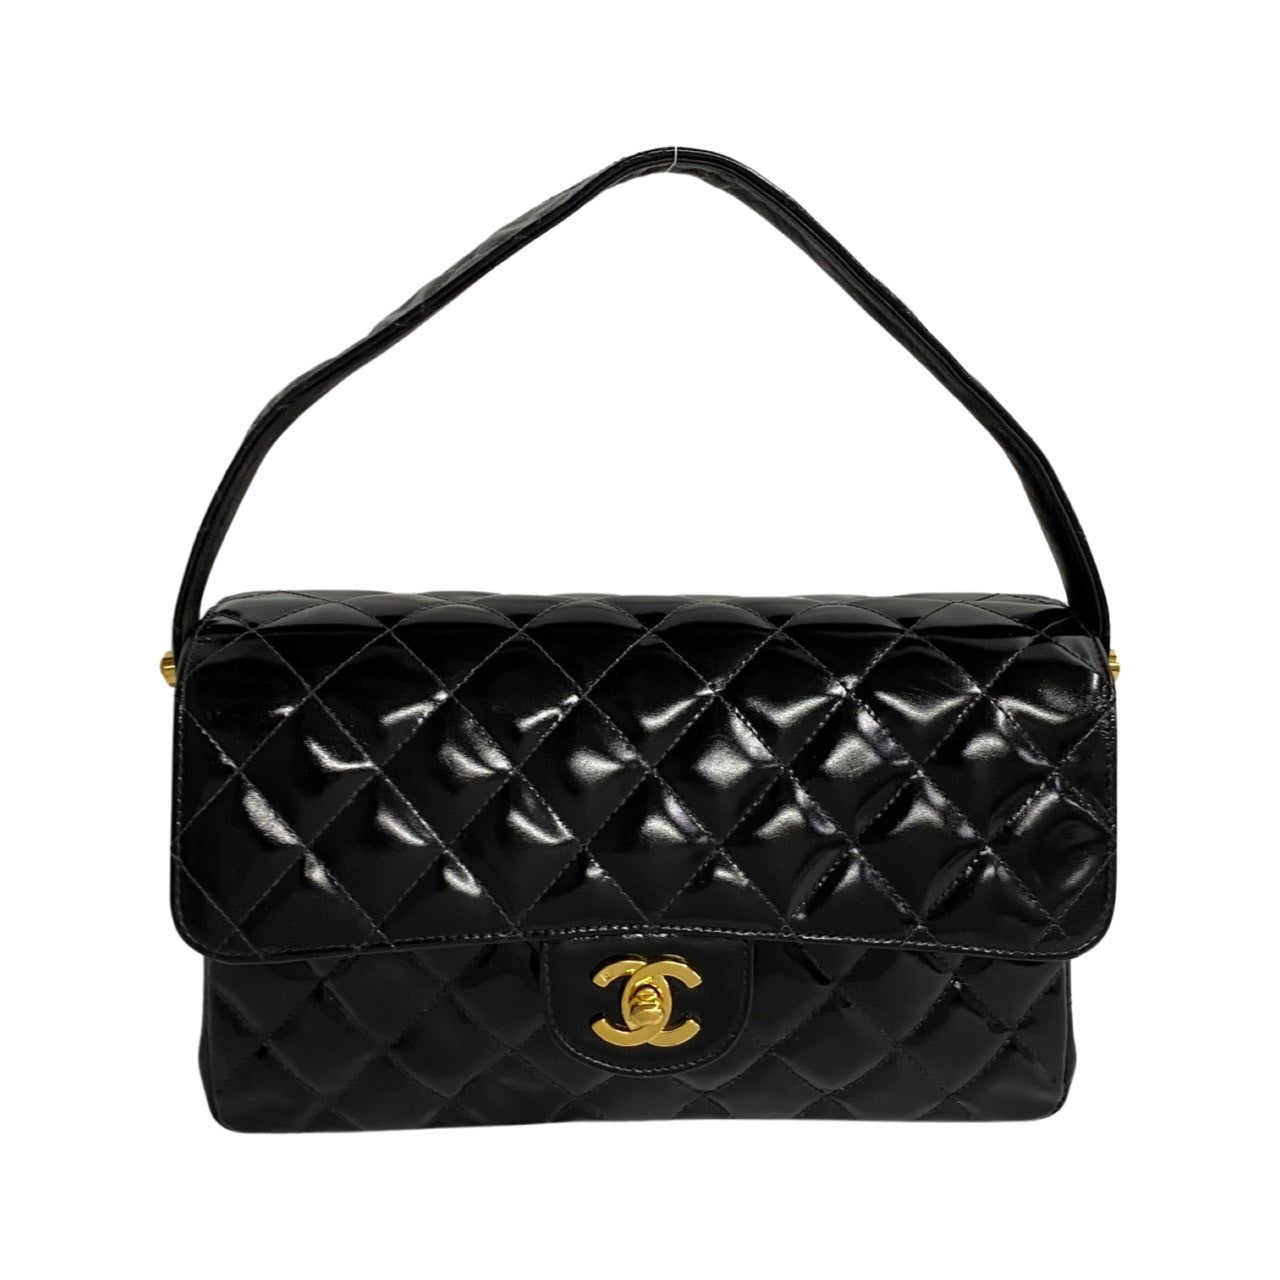 CC Quilted Patent Leather Flap Handbag